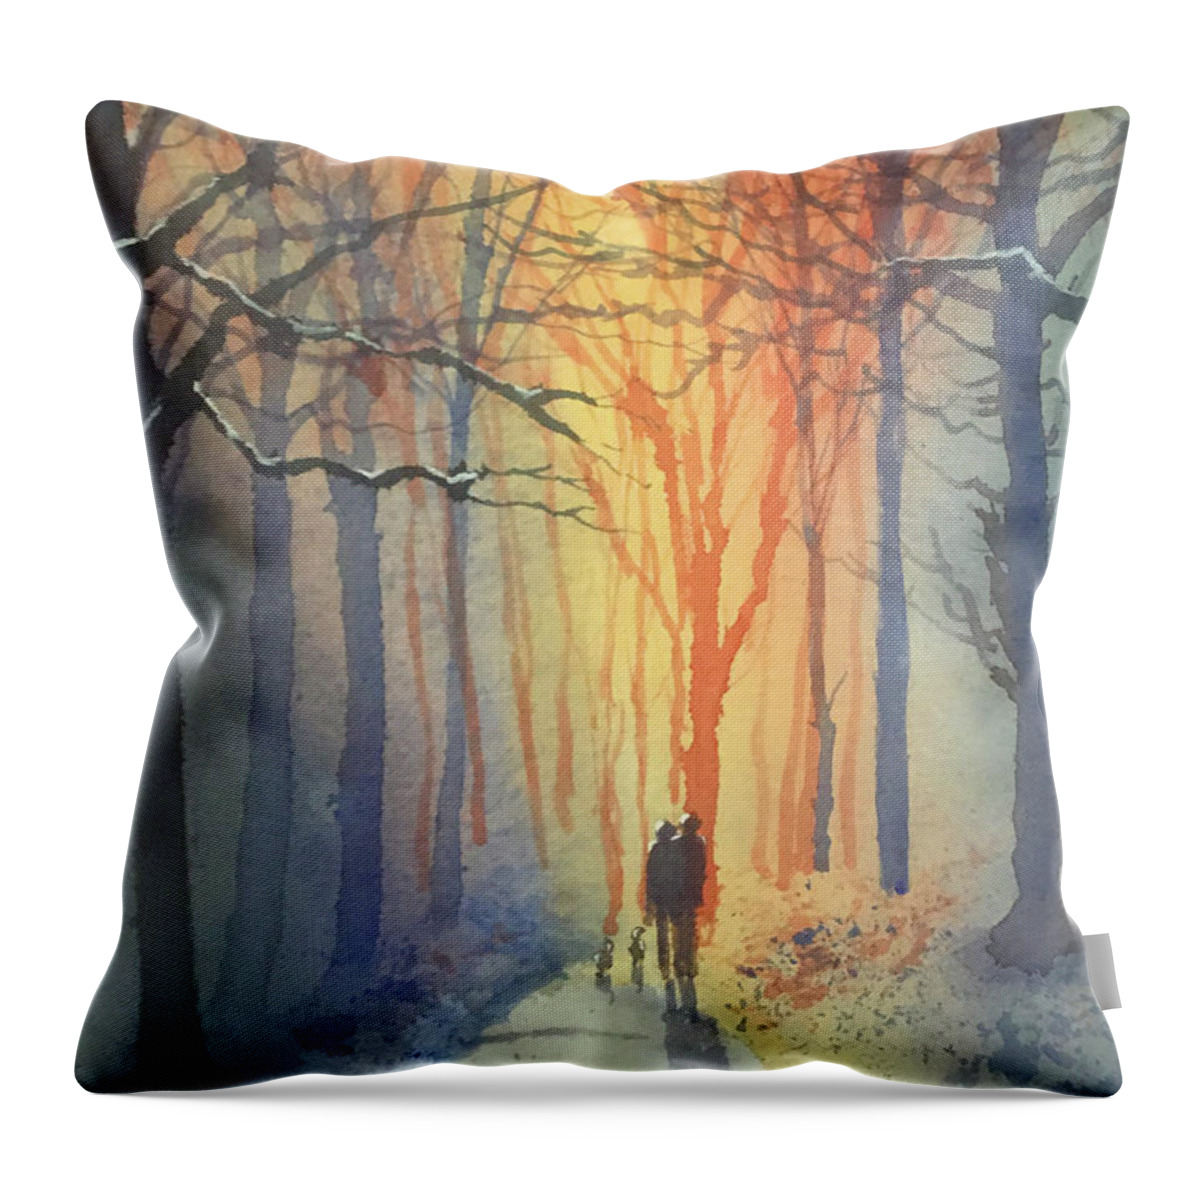 Watercolour Throw Pillow featuring the painting Winter Walk in Sledmere Woods by Glenn Marshall